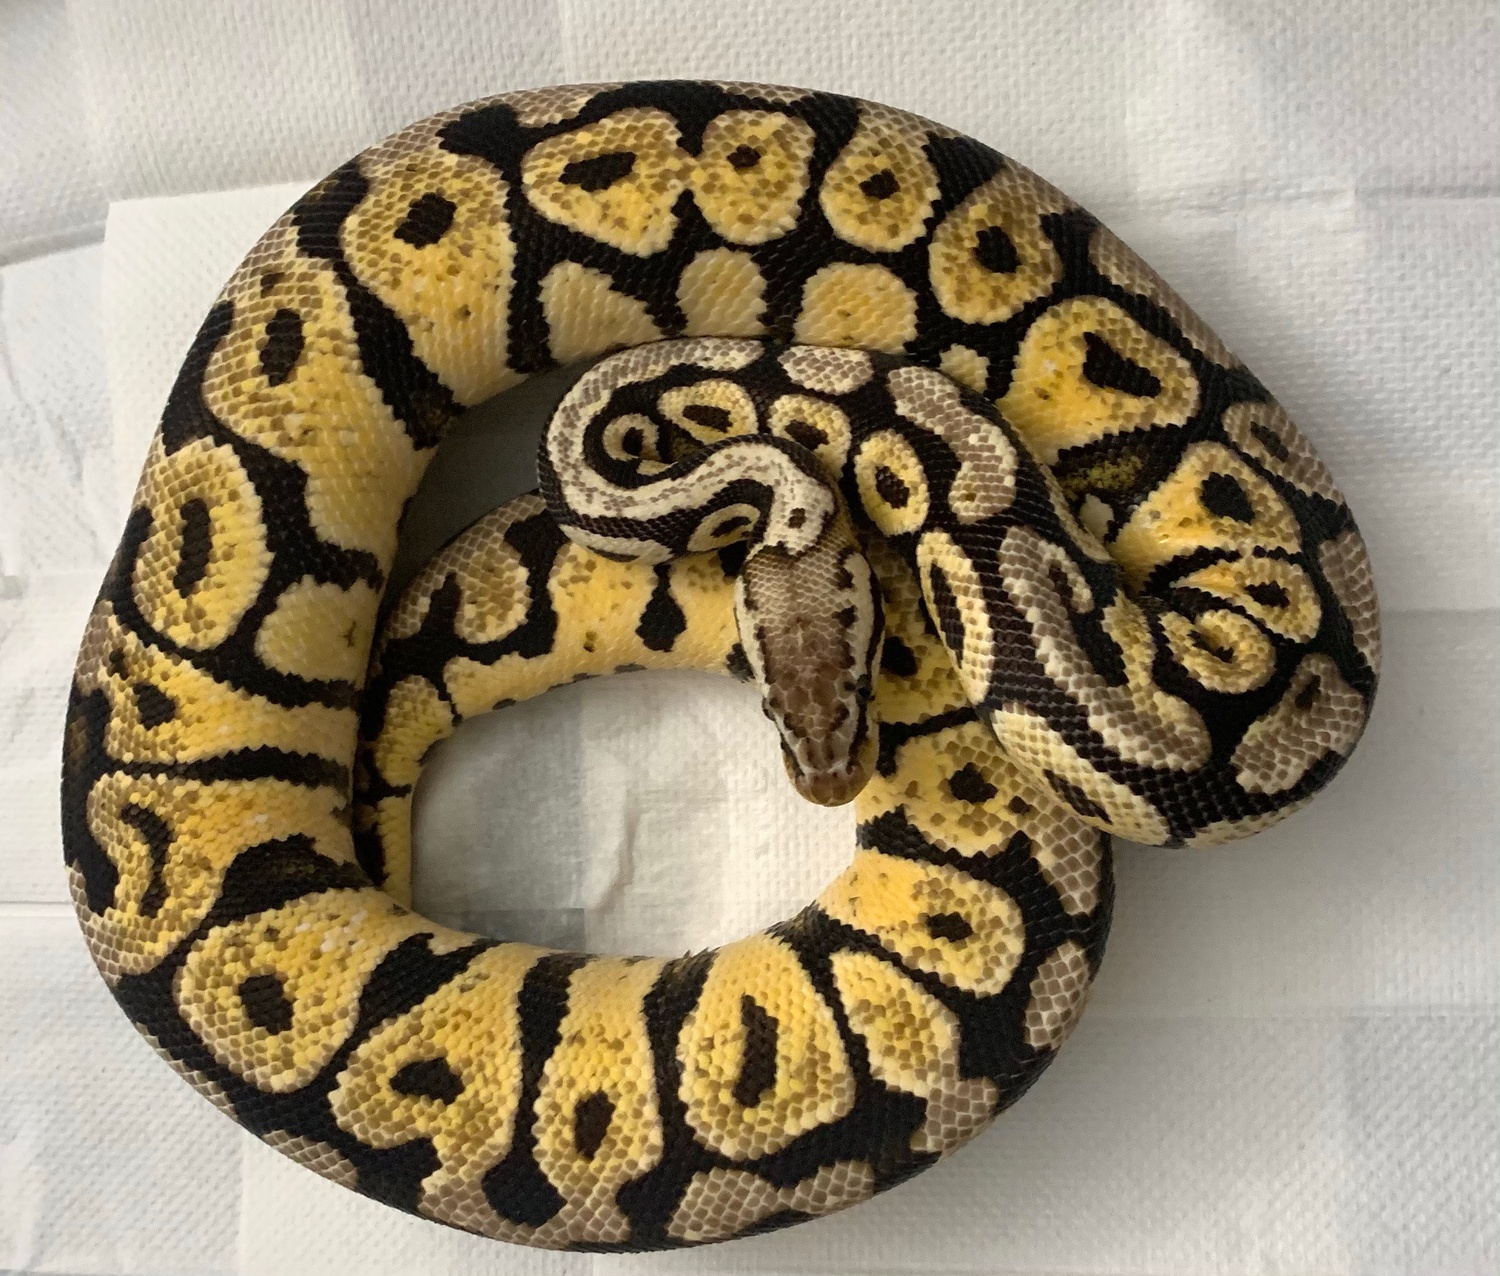 Epic Spotnose Special Ball Python by Babes with Balls USA